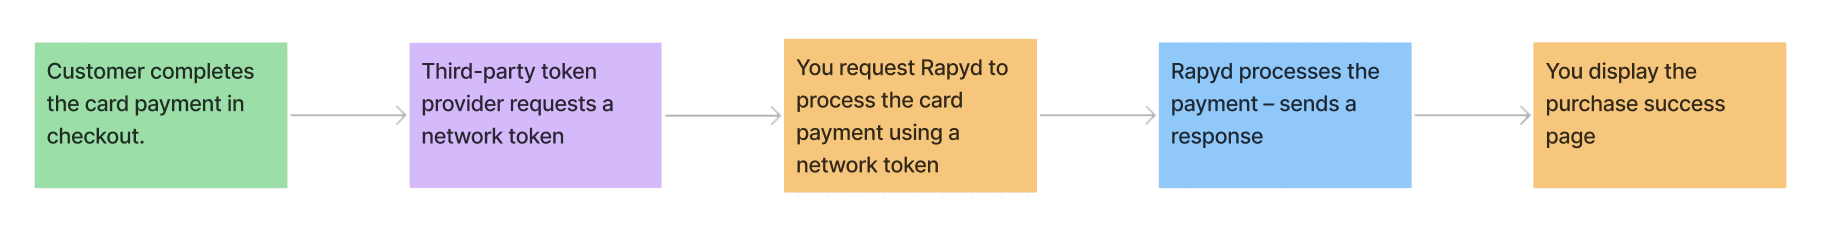 card-payment-workflow.jpg